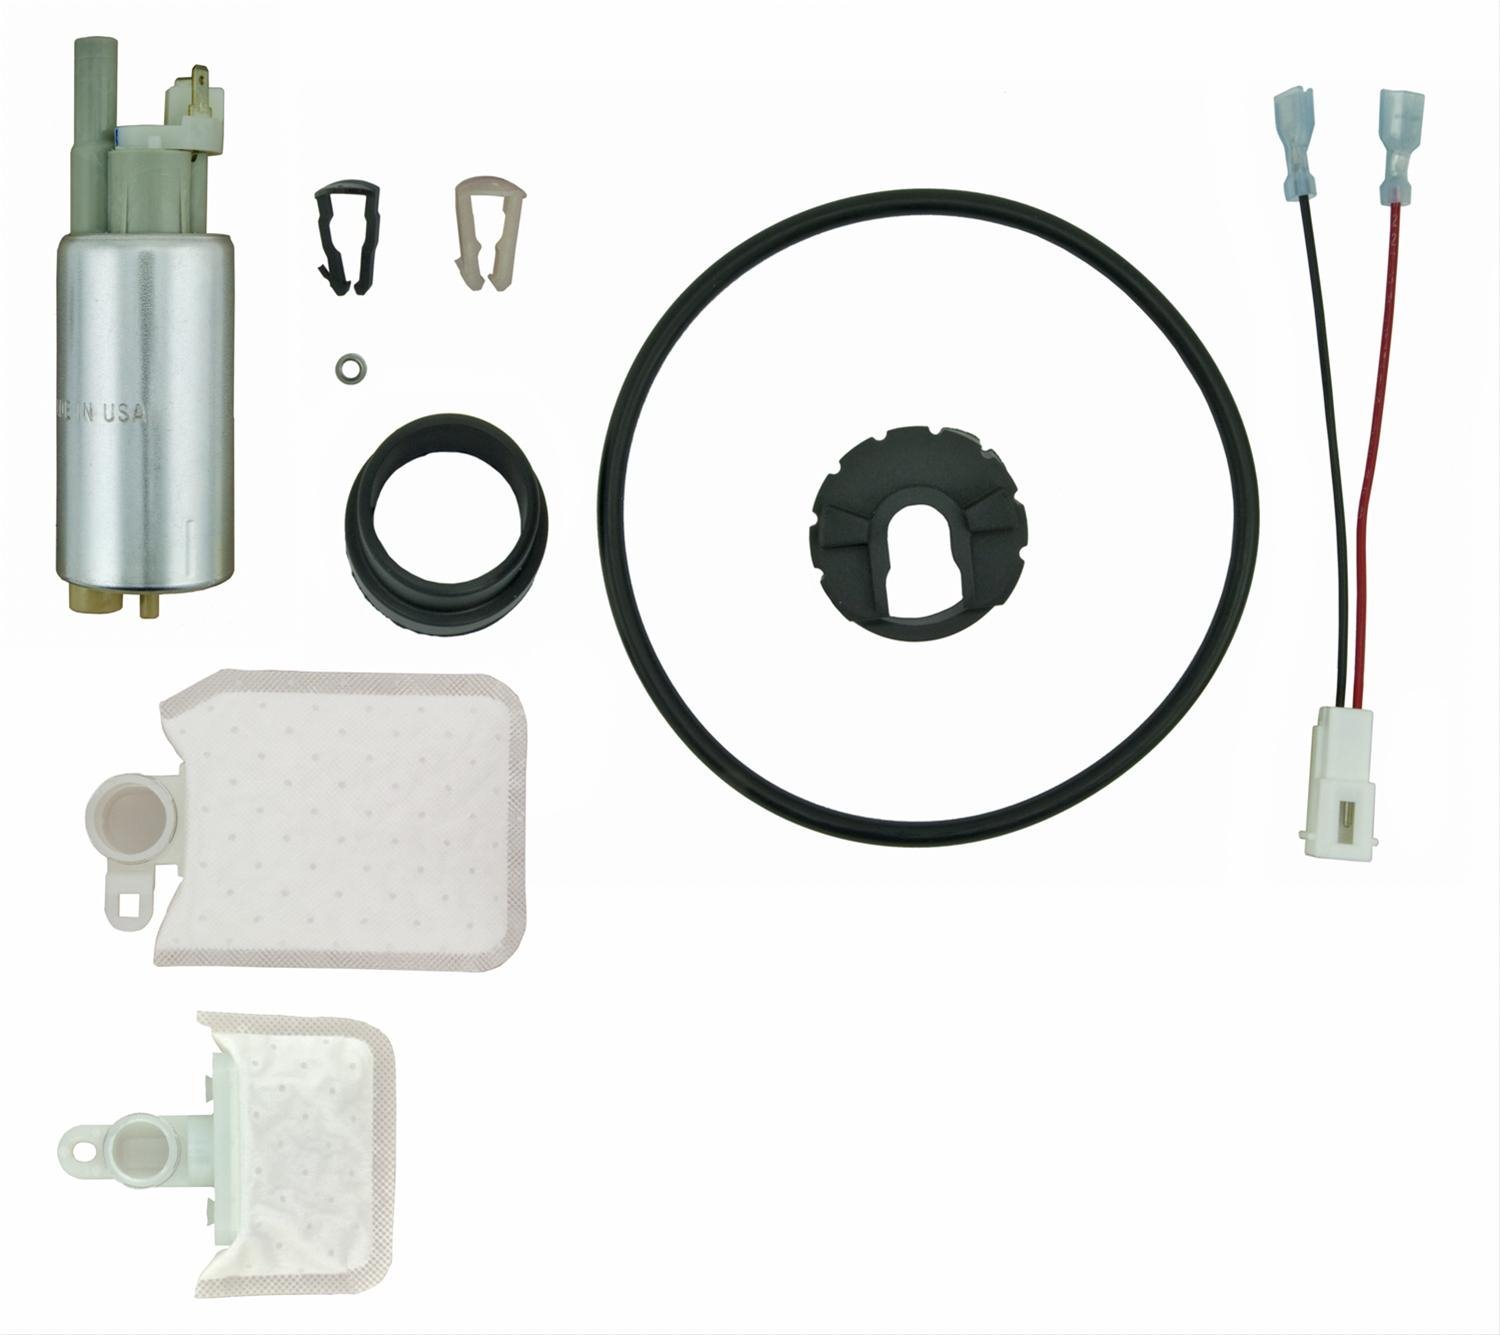 EFI In-Tank Electric Fuel Pump And Strainer Set for 1997-1998,2000-2001 Ford Taurus/Mercury Sable/1999-2000 Ford Windstar